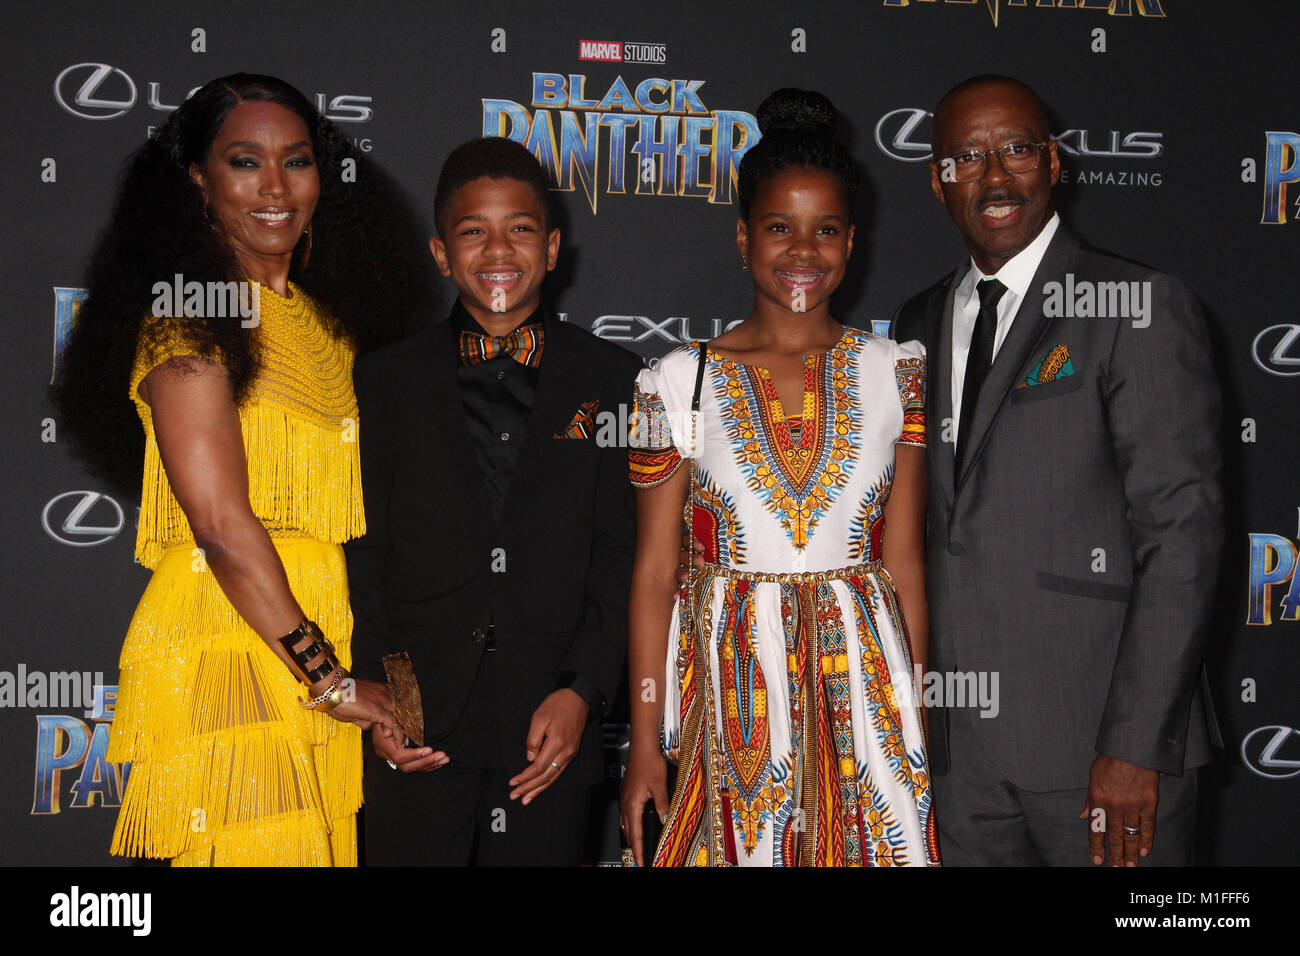 Angela Bassett, Slater Vance, Bronwyn Vance,  Courtney B. Vance  01/29/2018 The World Premiere of 'Black Panther' held at The Dolby Theatre in Los Angeles, CA Photo by Izumi Hasegawa / HollywoodNewsWire.co Stock Photo